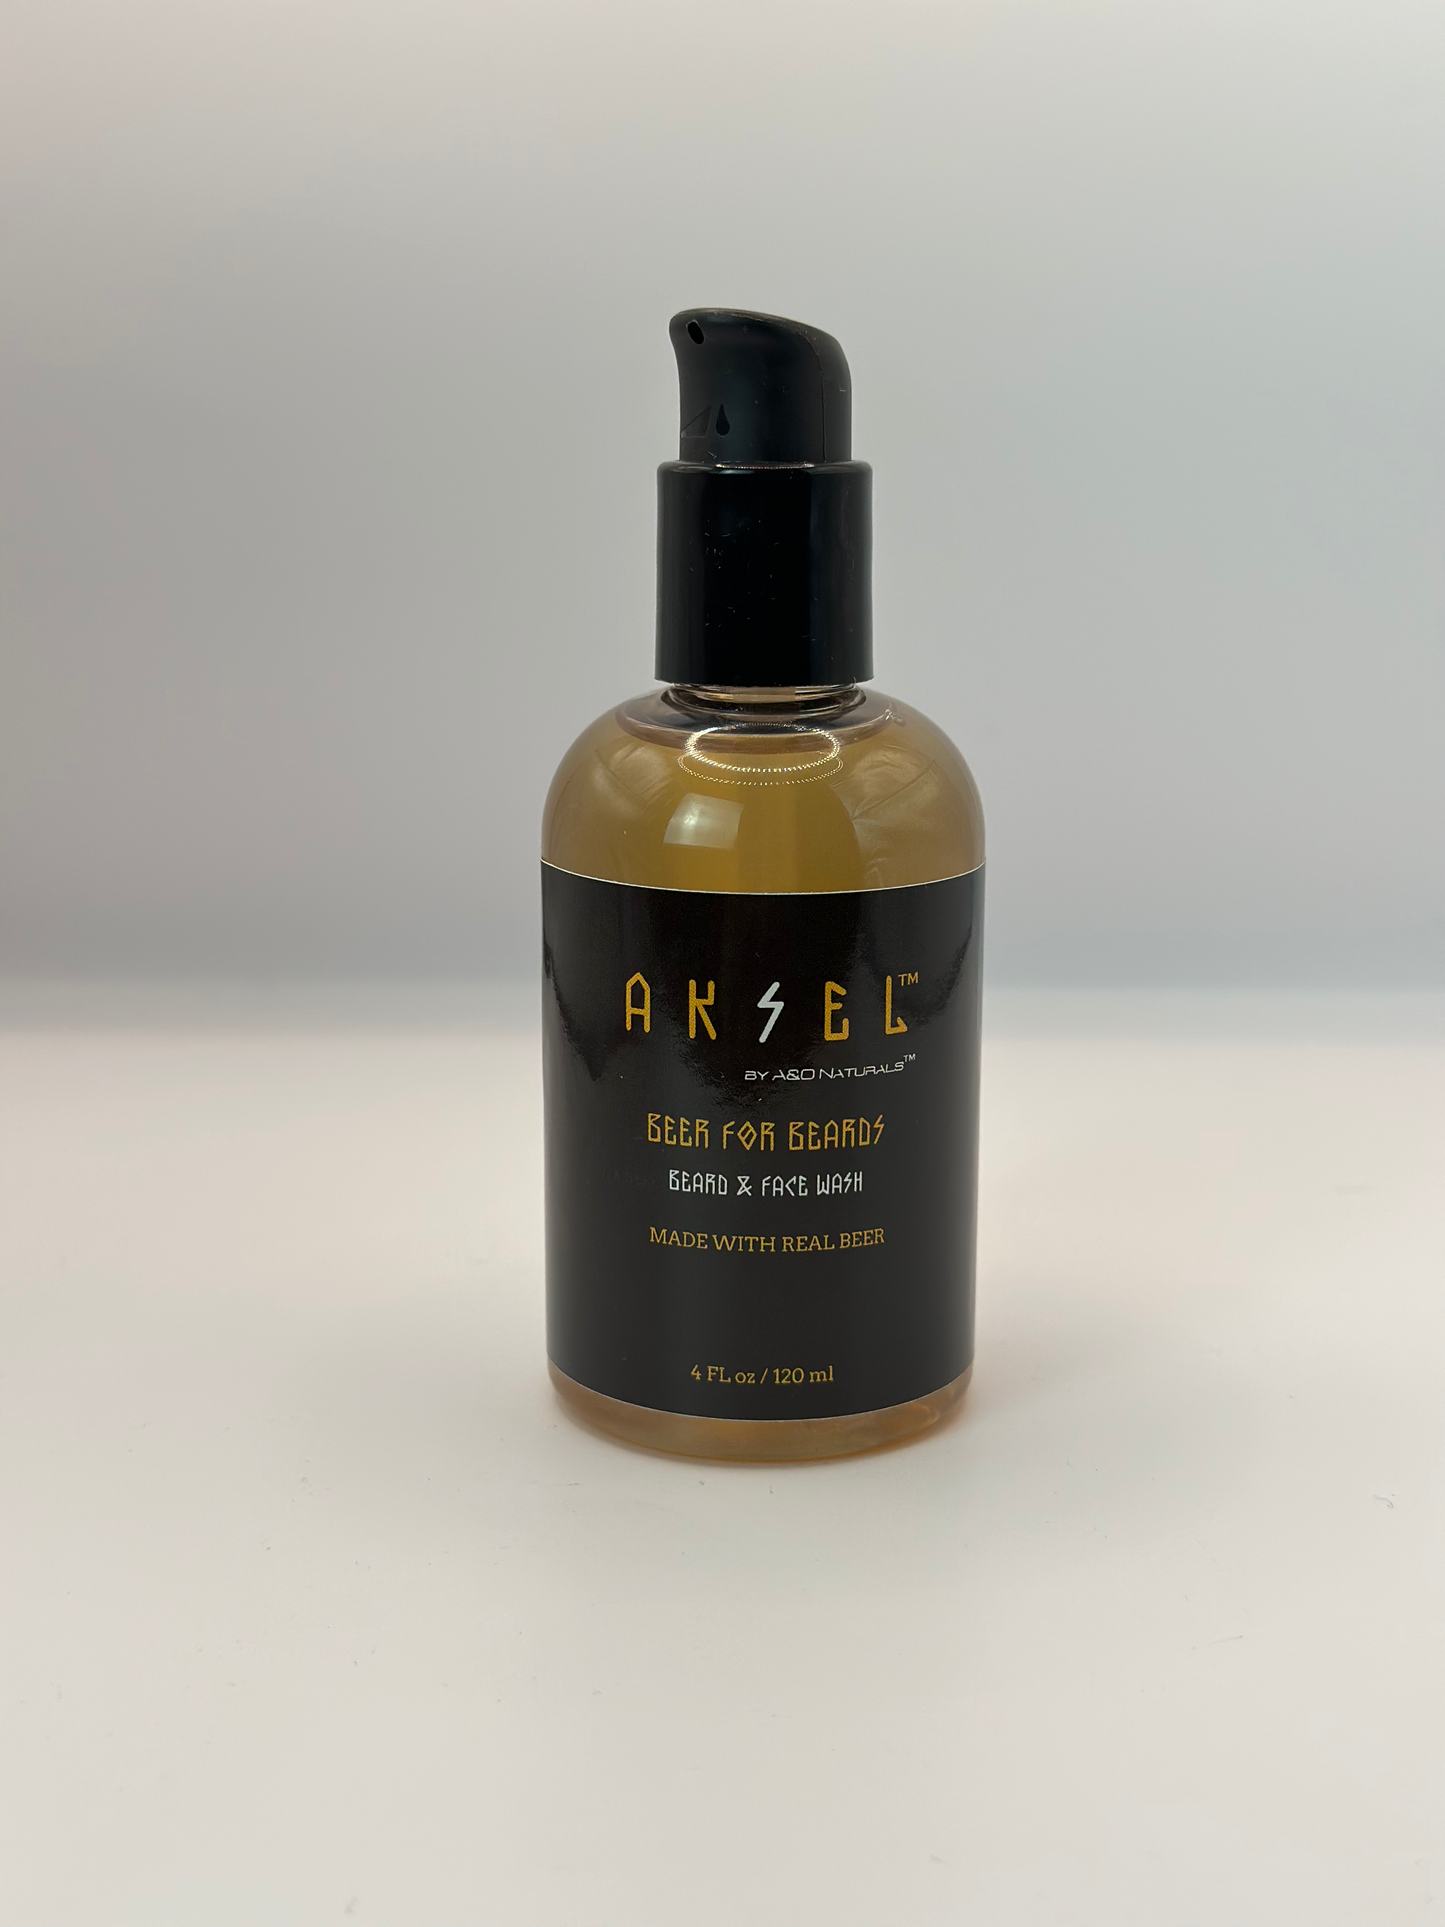 Aksel Beer for Beards face and beard wash